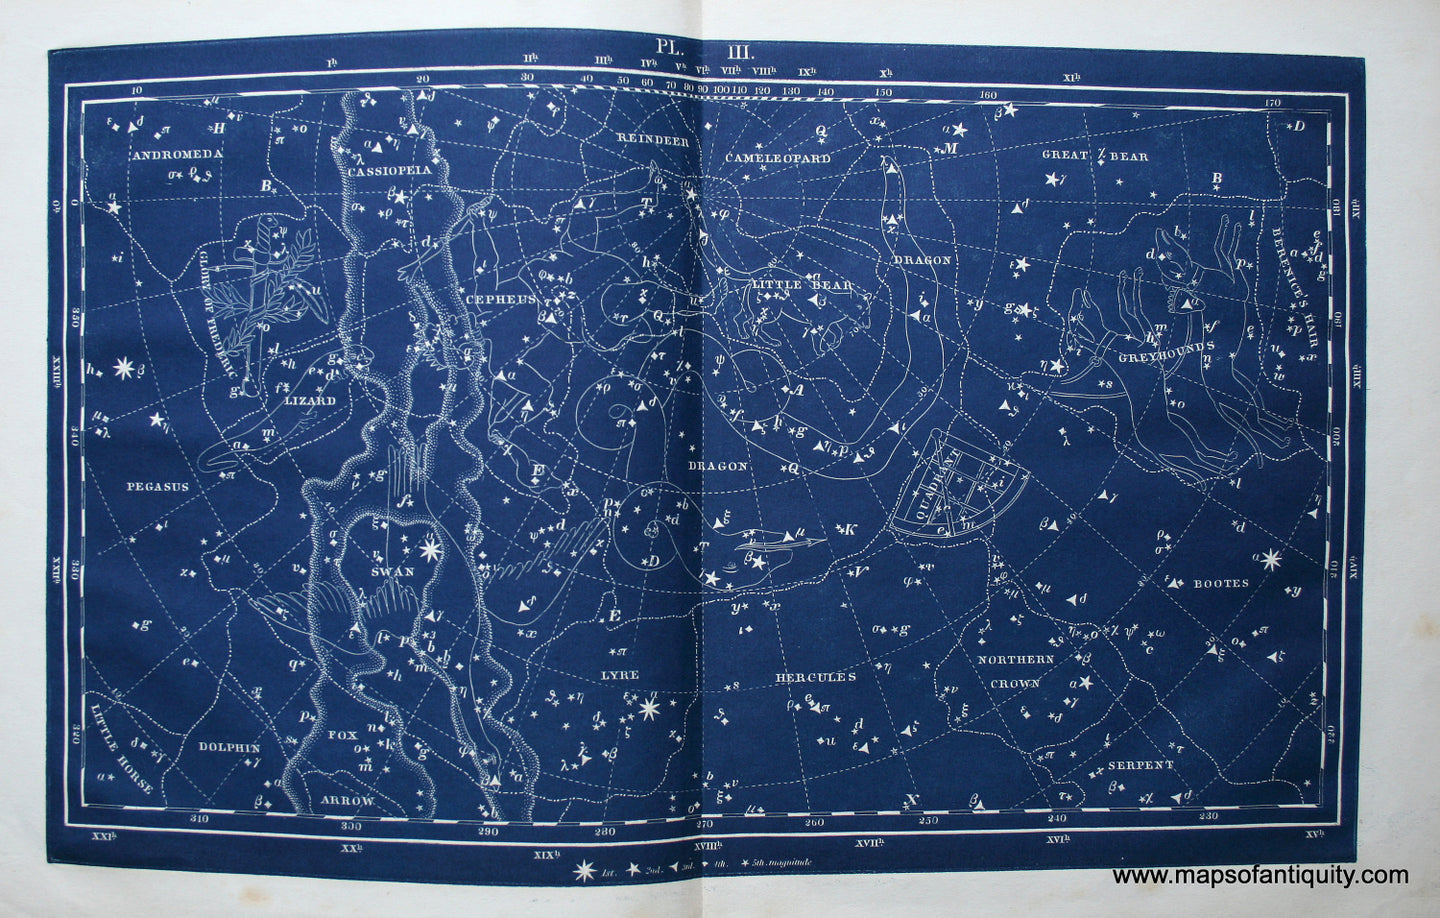 Antique-Printed-Color-Celestial-Map-Plate-III-with-Cassiopeia-and-Andromeda-Constellations-**********-Celestial--1846-Butler-Maps-Of-Antiquity